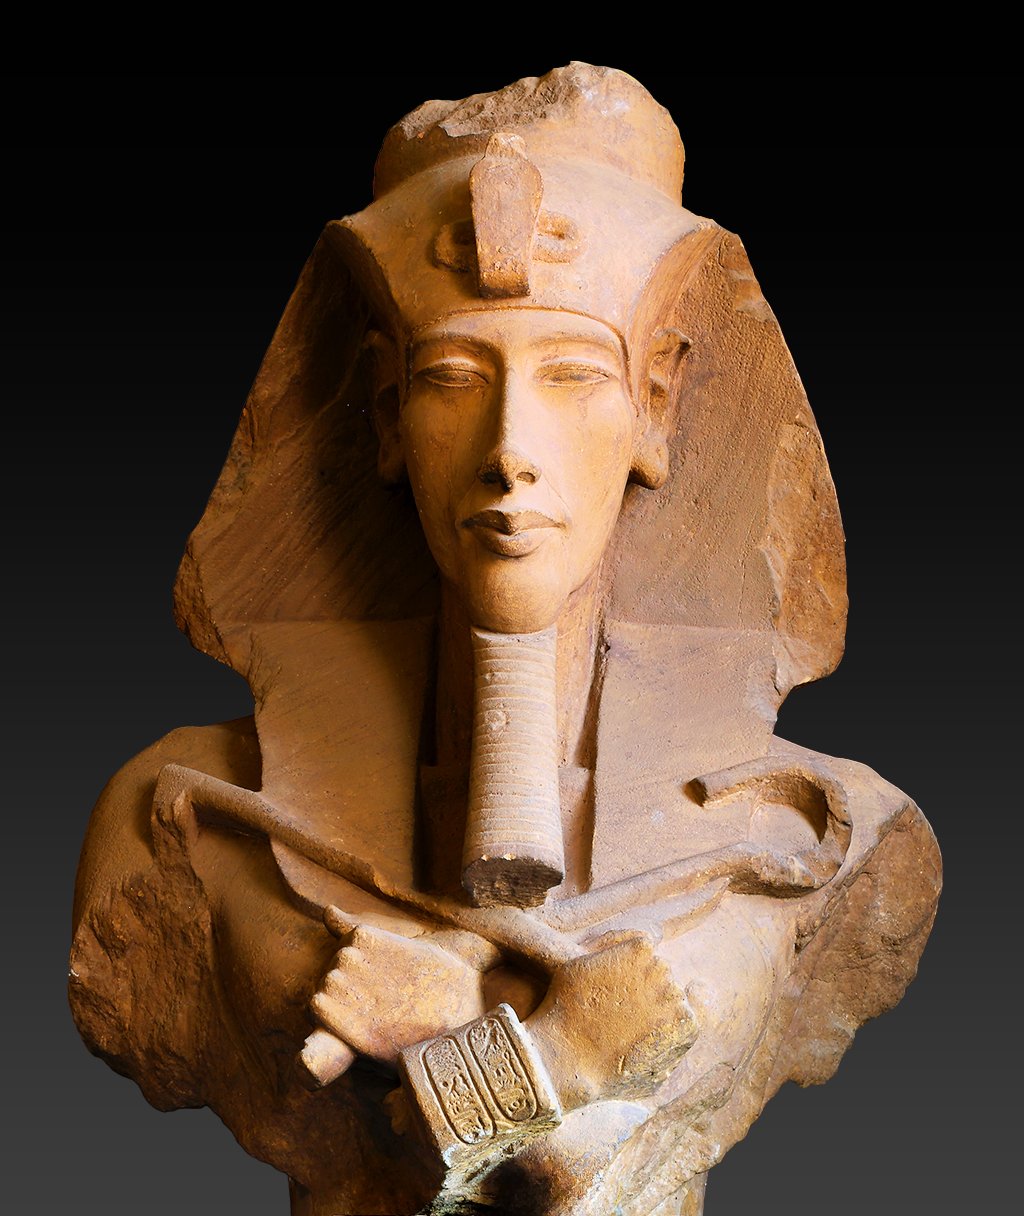 A stone sculpture of a Amenhotep IV/Akhenaten bust. His hands are crossed at the chest. The sculpture is on a black background.